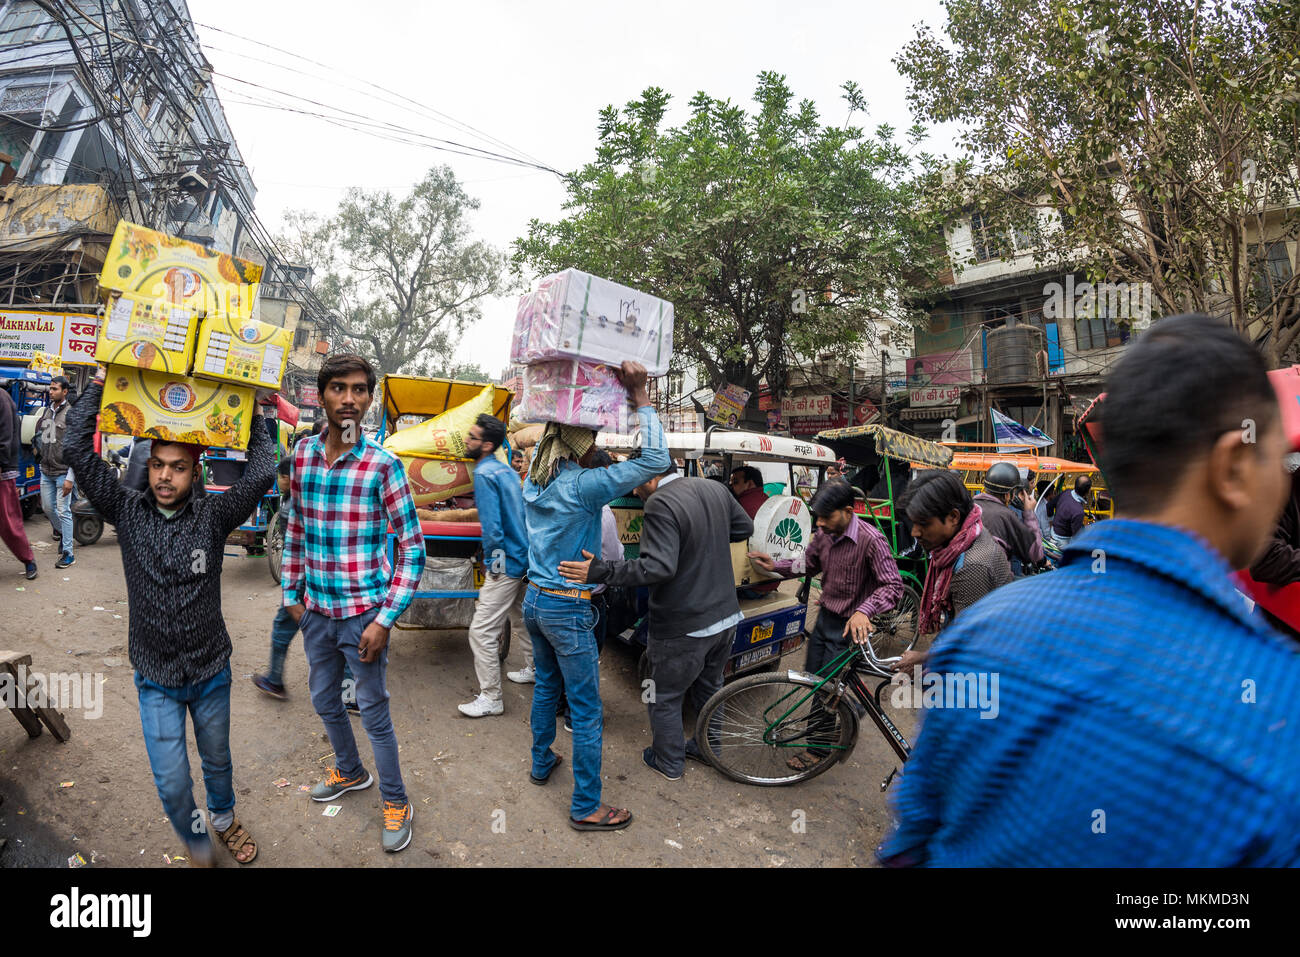 Delhi, India - December 11, 2017: crowd and traffic on street at Chandni Chowk, Old Delhi, famous travel destination in India. Chaotic city life, work Stock Photo